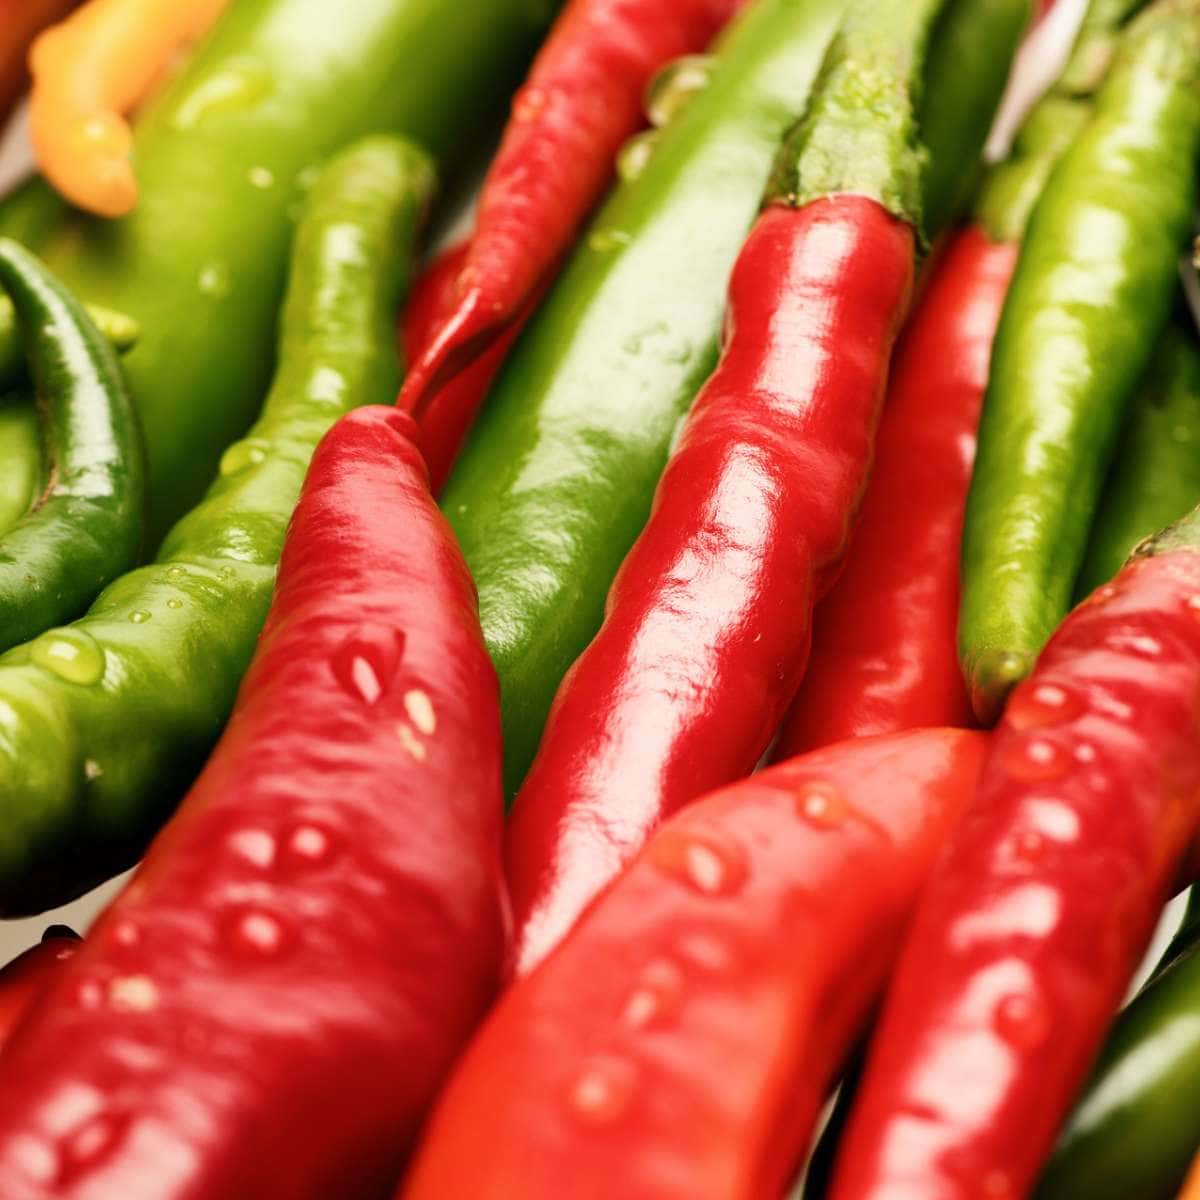 A close shot of various red and green peppers.